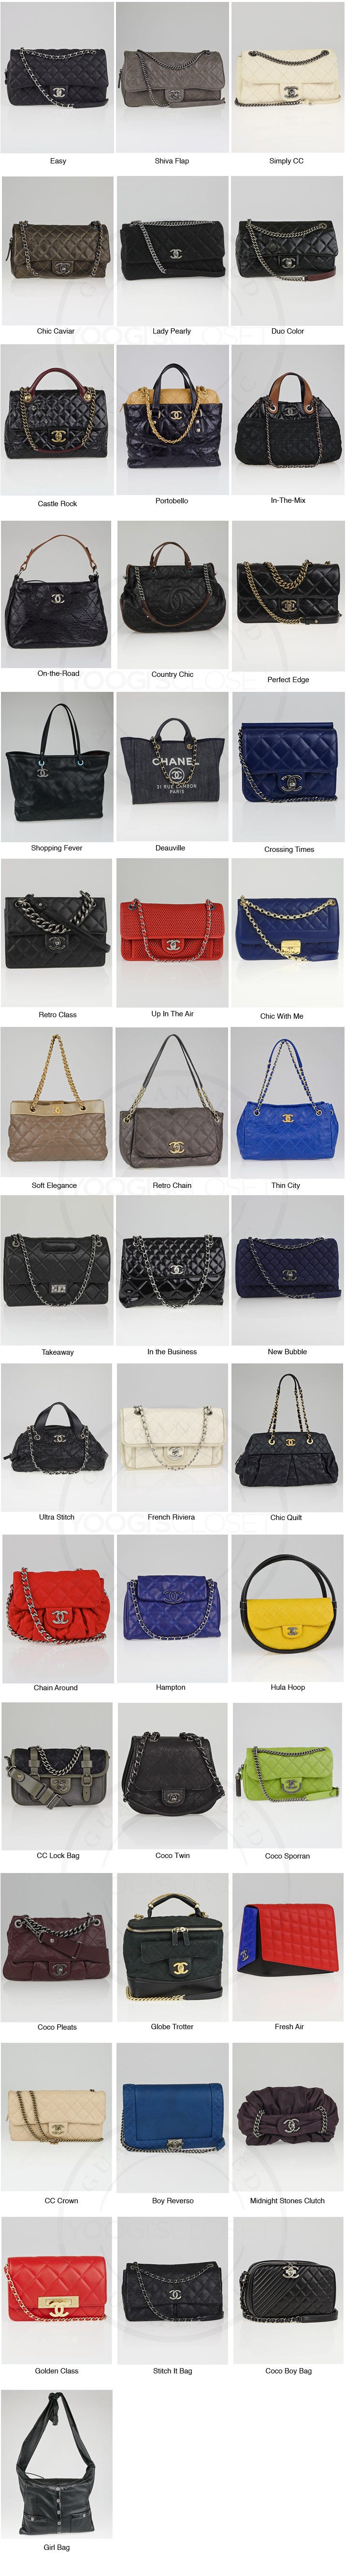 Chanel reference chart